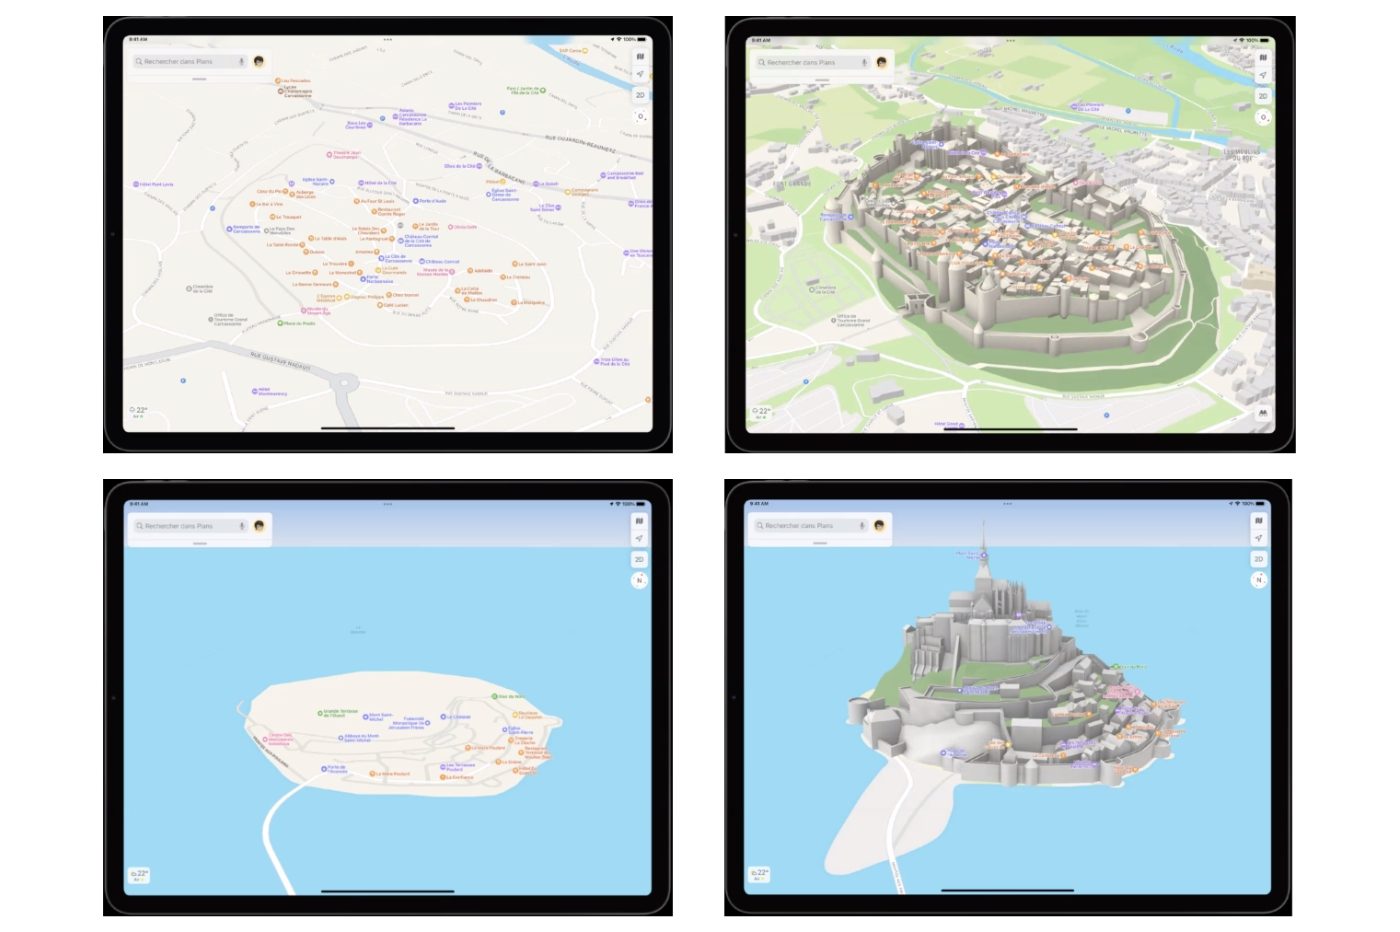 Apple maps, before and after.  Carcassonne and Mont Saint-Michel.